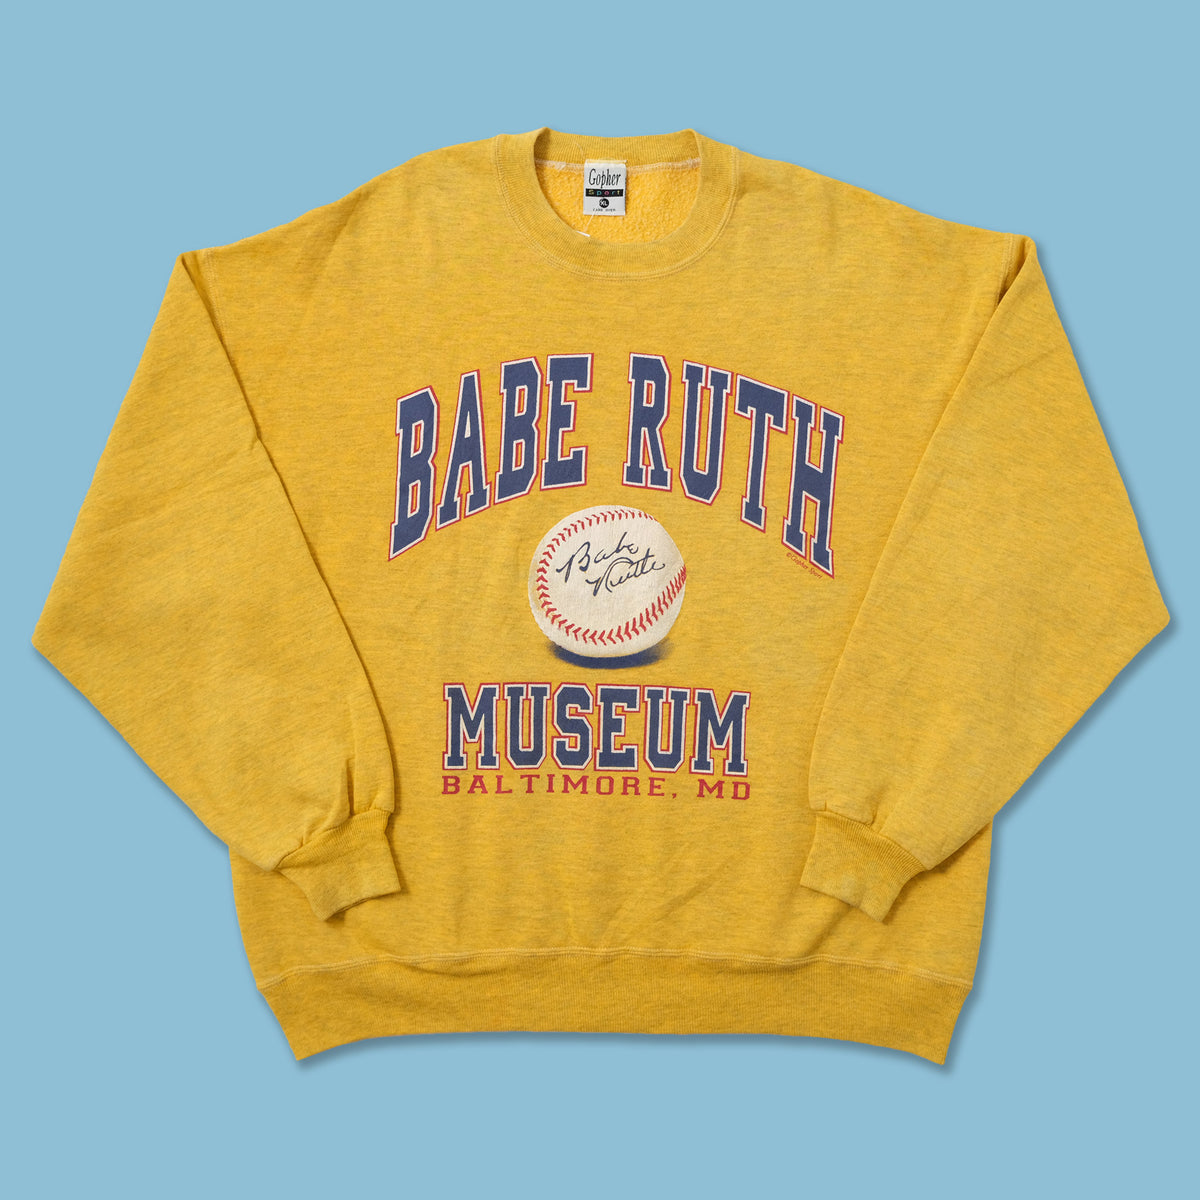 Vintage Babe Ruth Sweater Xlarge Double Double Vintage